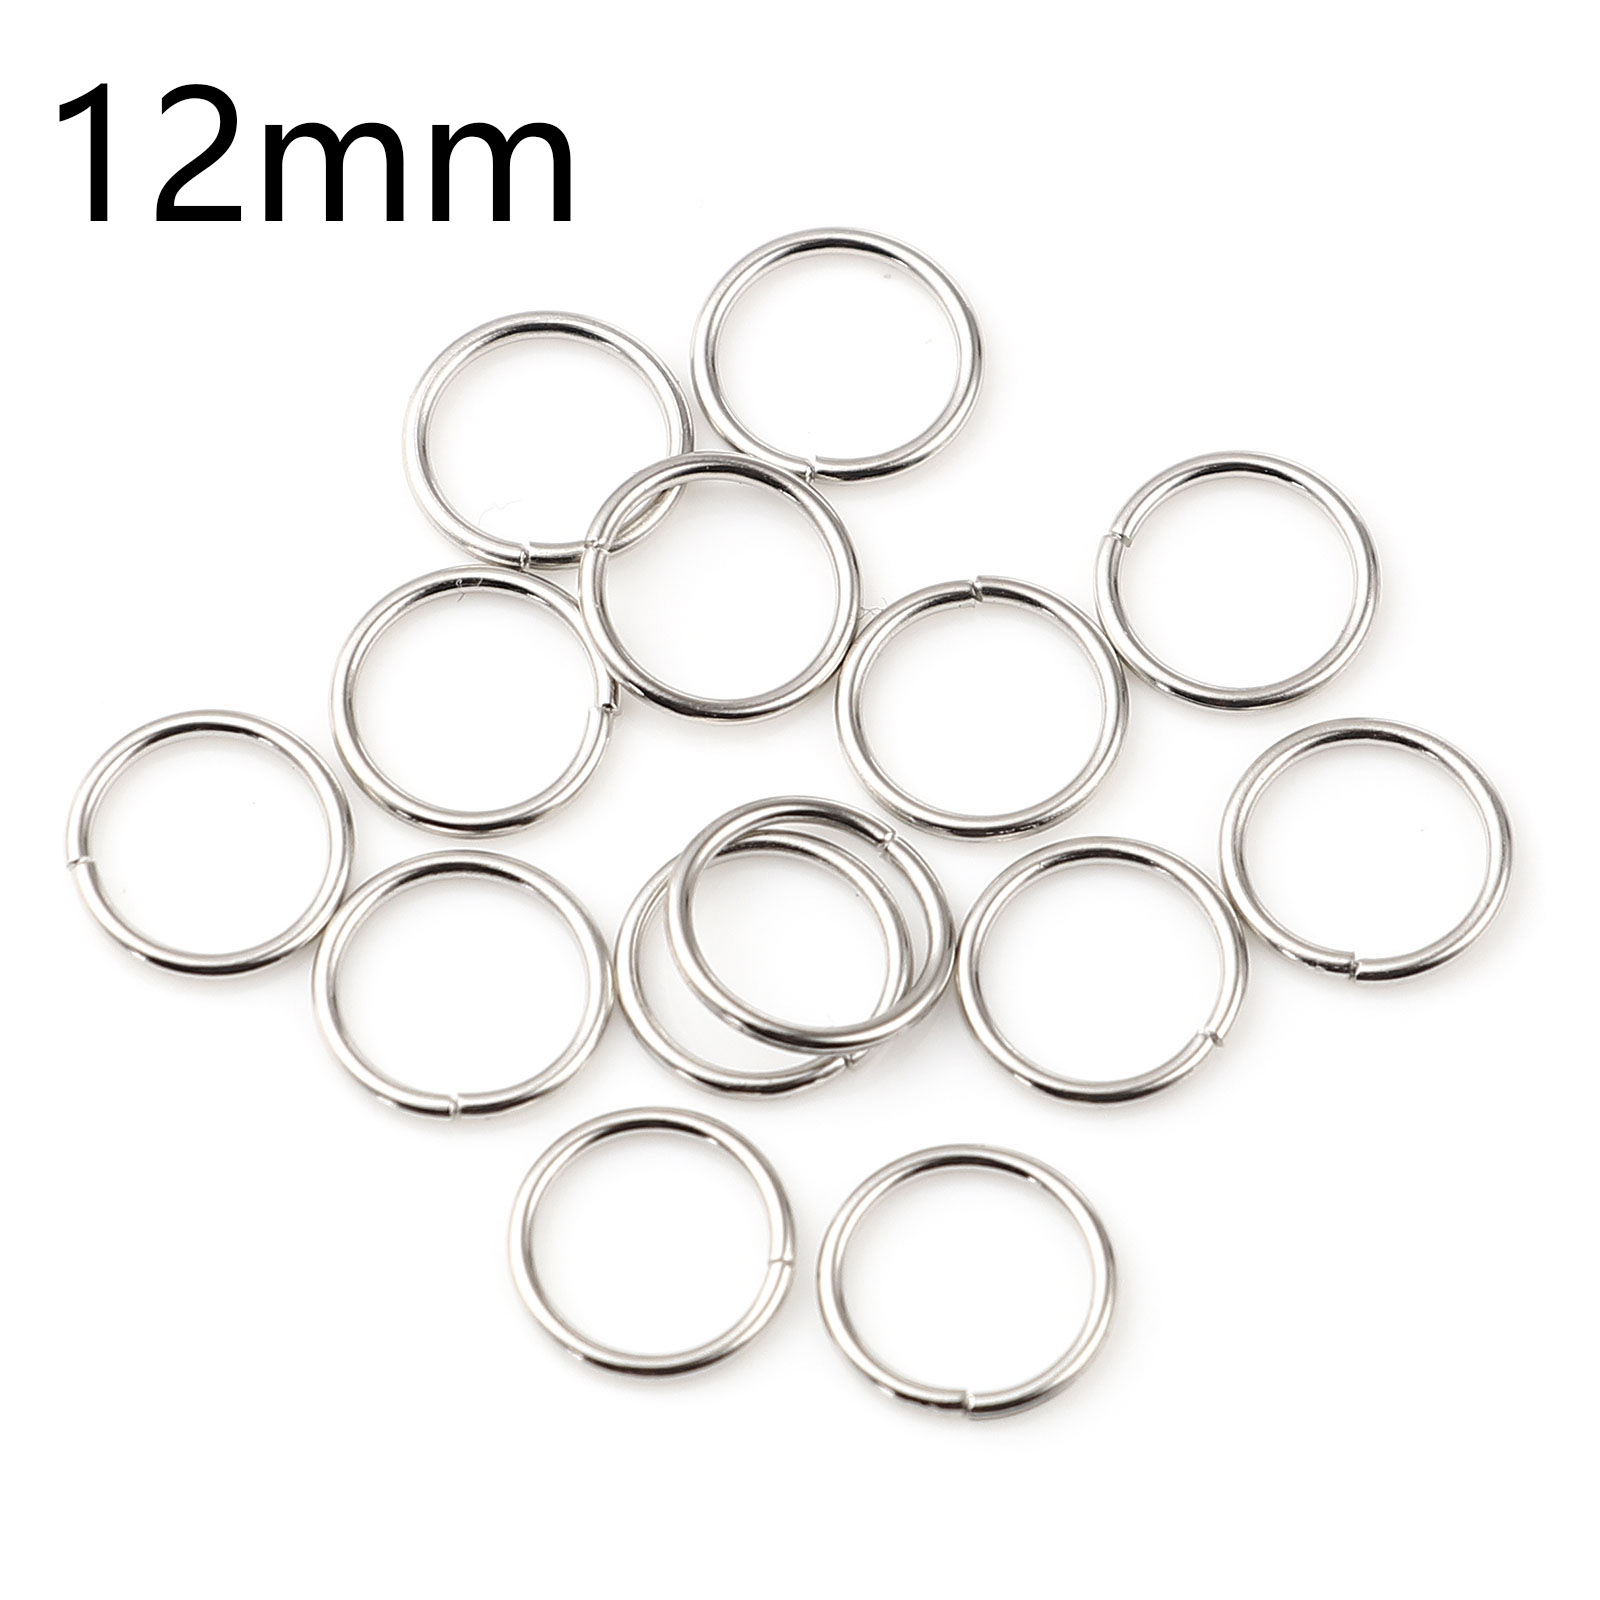 Picture of 1.2mm Iron Based Alloy Open Jump Rings Findings Circle Ring Silver Tone 12mm Dia, 200 PCs